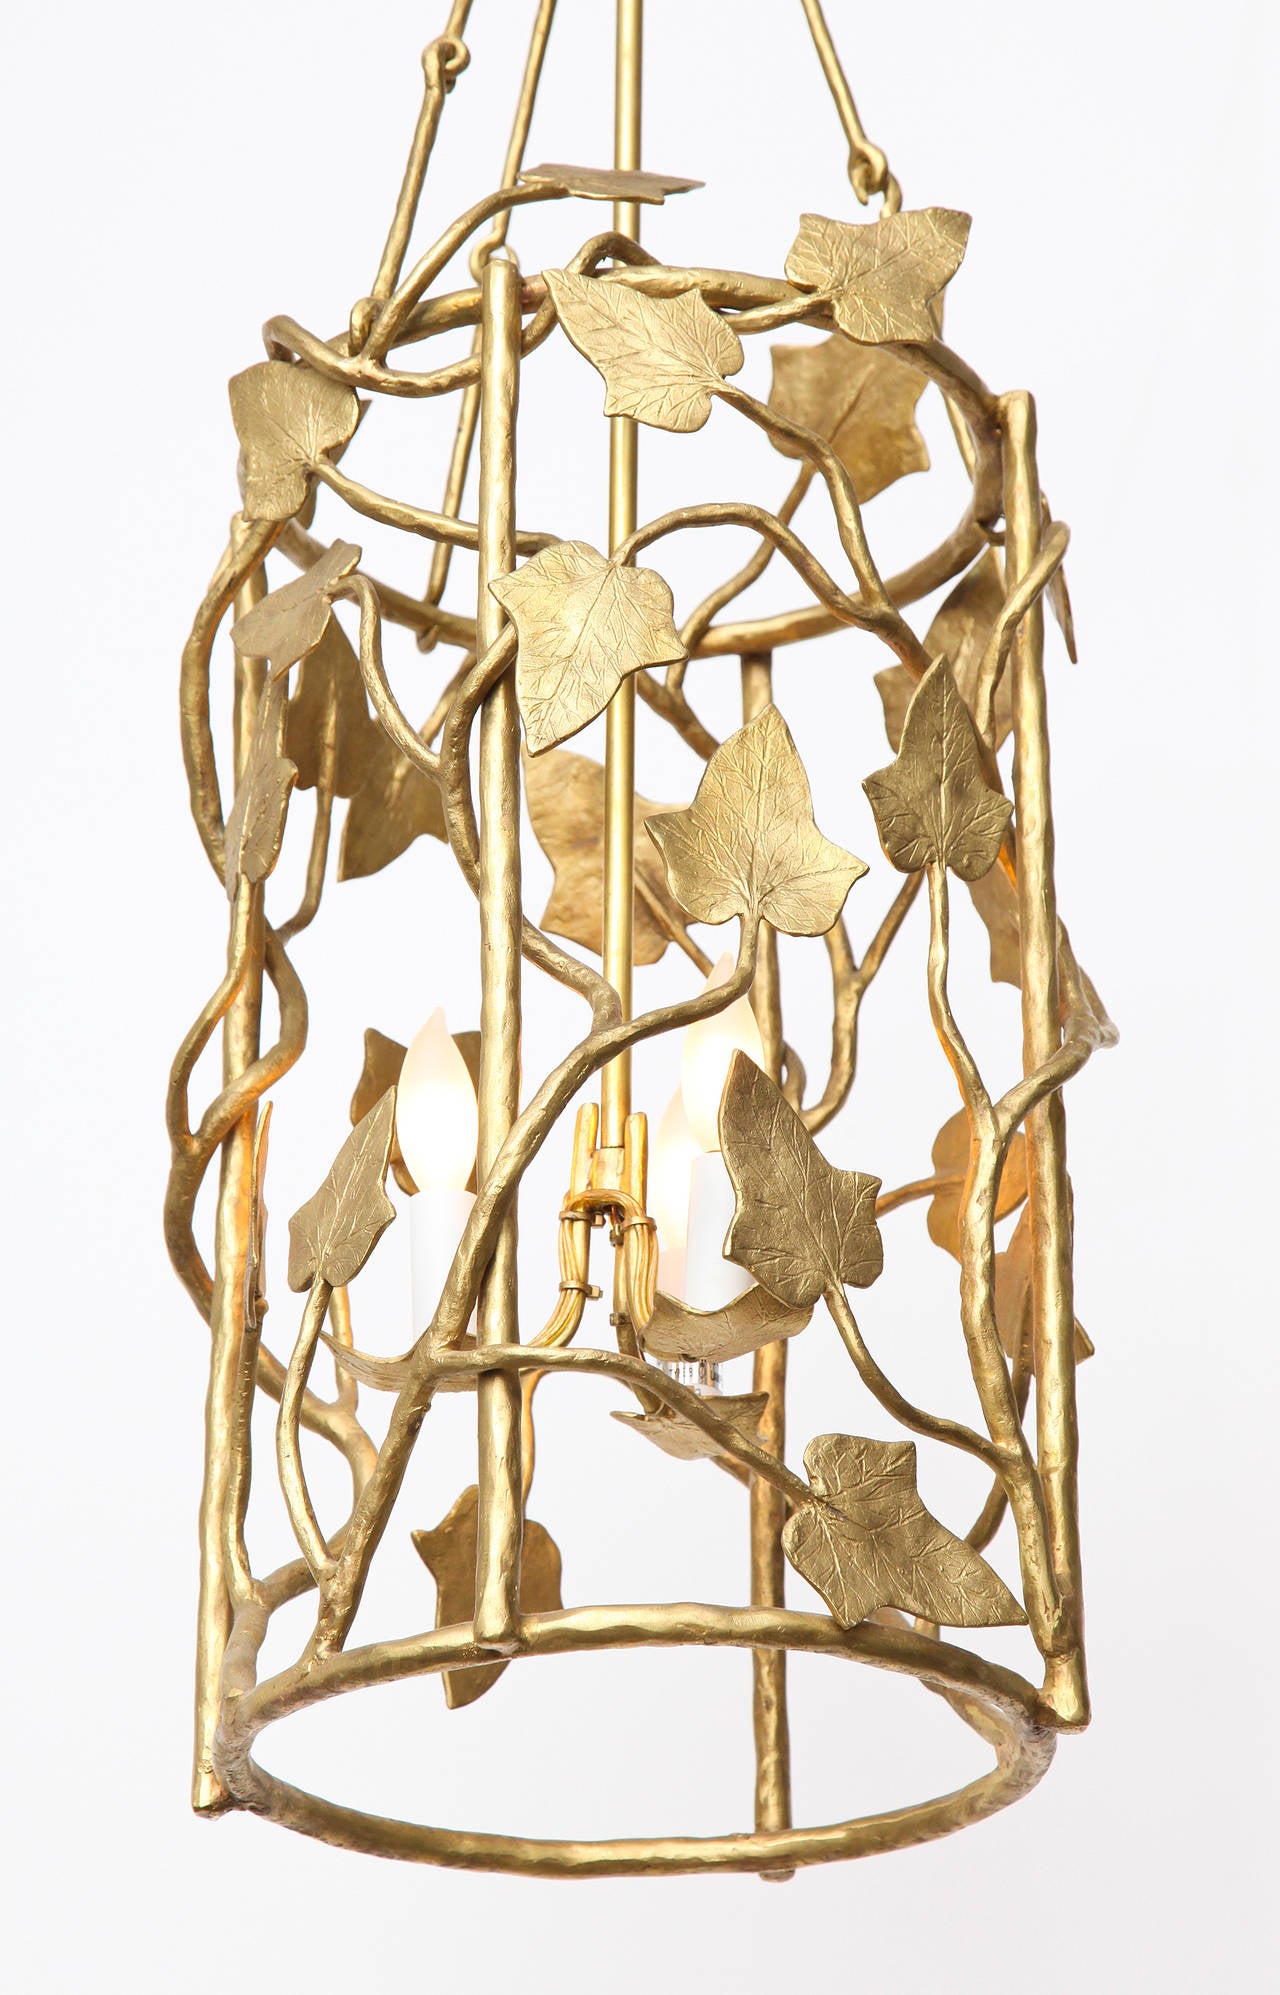 Polished bronze lantern by Marc Bankowsky.

Measures: Overall drop 35